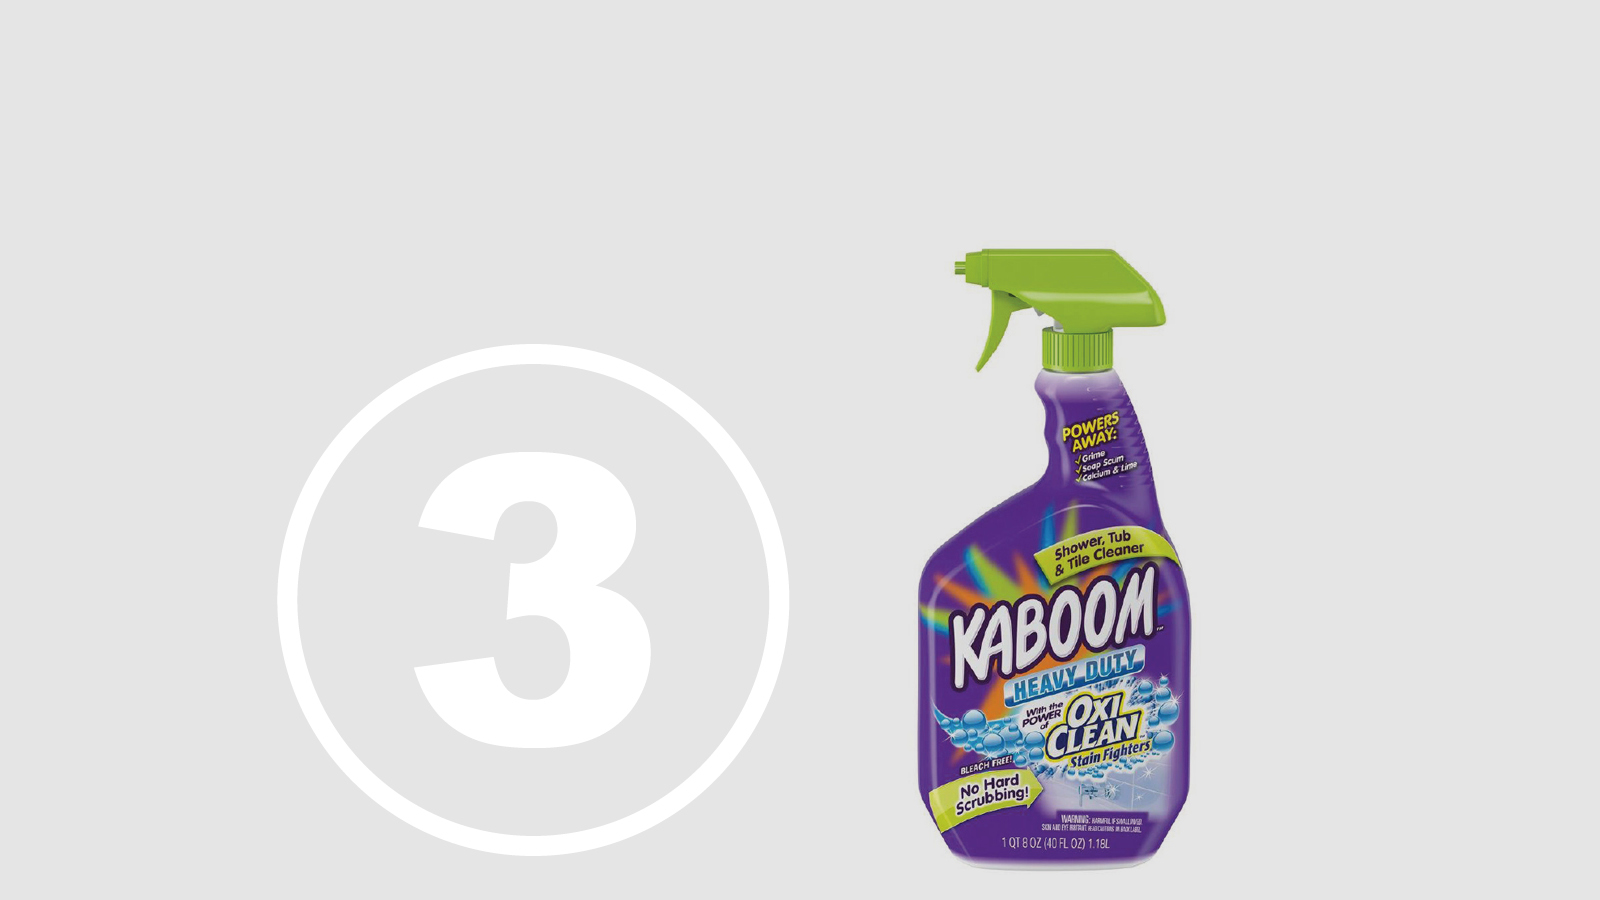 <h5>Top Ten Most Hazardous Products</h5><h4>Kaboom with OxiClean Shower Tub & Tile Cleaner</h4><p>Marketed as a “great cleaner that is safe and friendly to use,” made by Church & Dwight Co.<br />We found <span class="highlight">15 chemicals</span> chemicals linked to chronic health effects with <span class="highlight">66.7% hidden in "fragrance."</span></p>